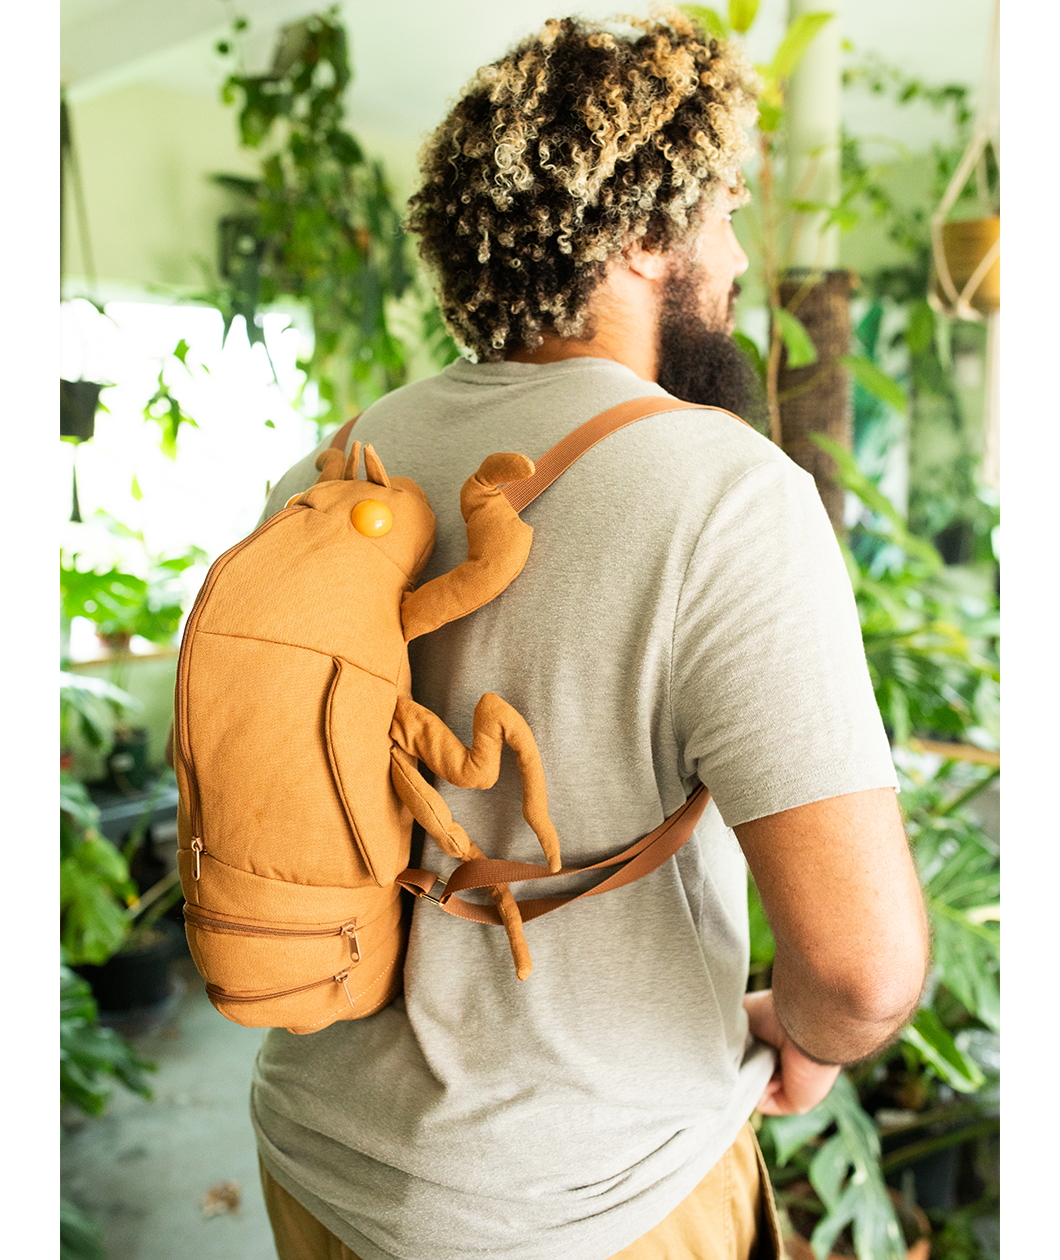 Man wearing cicada shell shaped backpack in a room full of plants. Looks like a giant cicada crawling up his back.